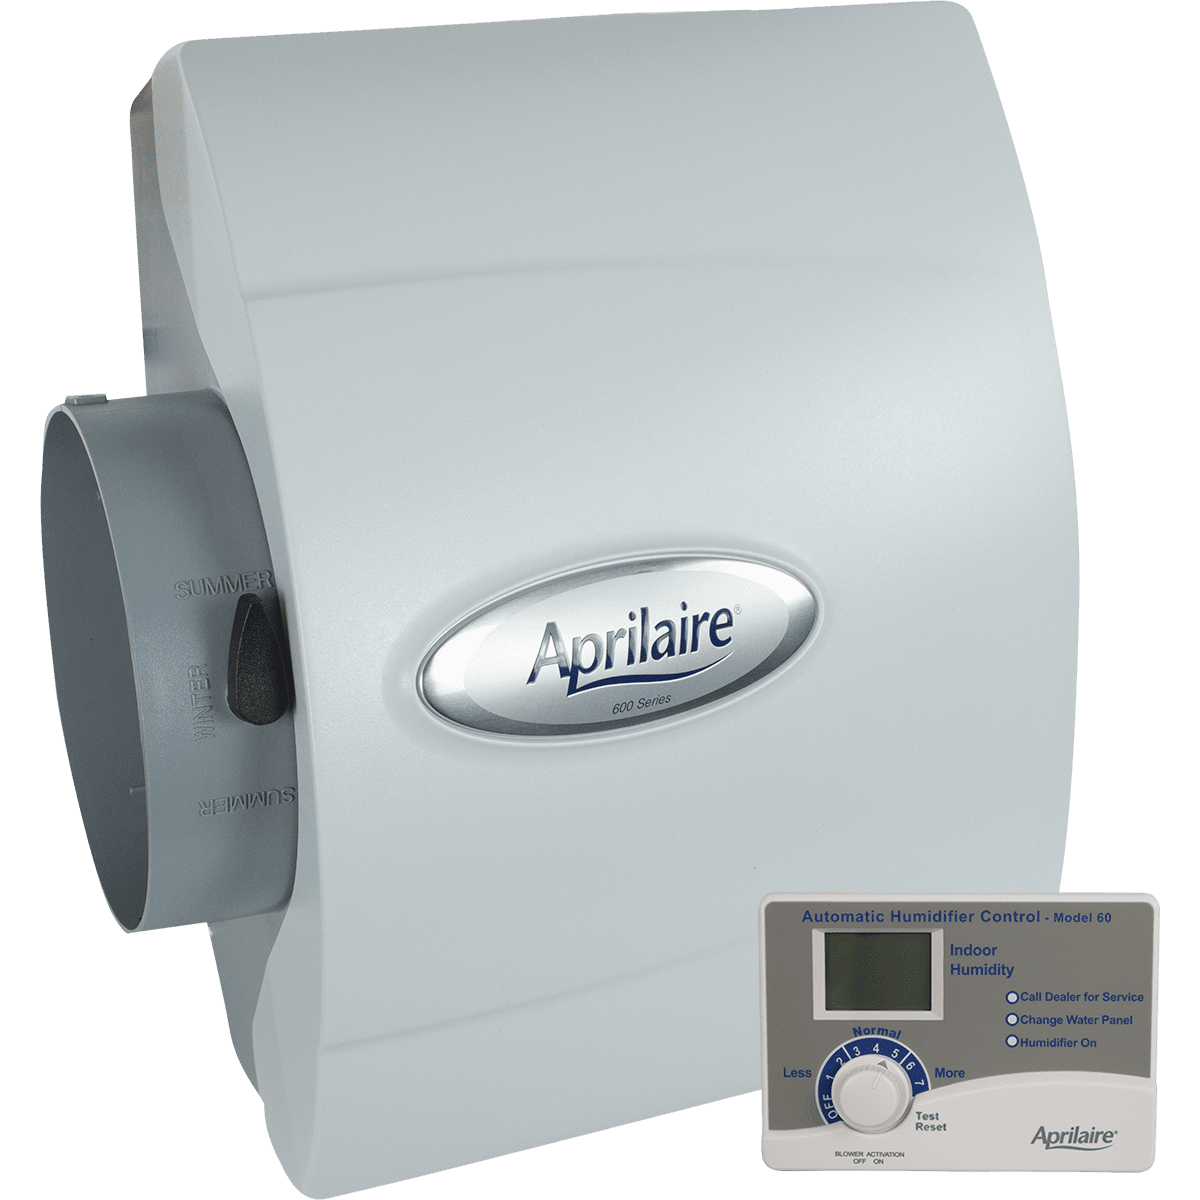 https://s3-assets.sylvane.com/media/images/products/aprilaire-600-whole-house-humidifiers-auto-main.png